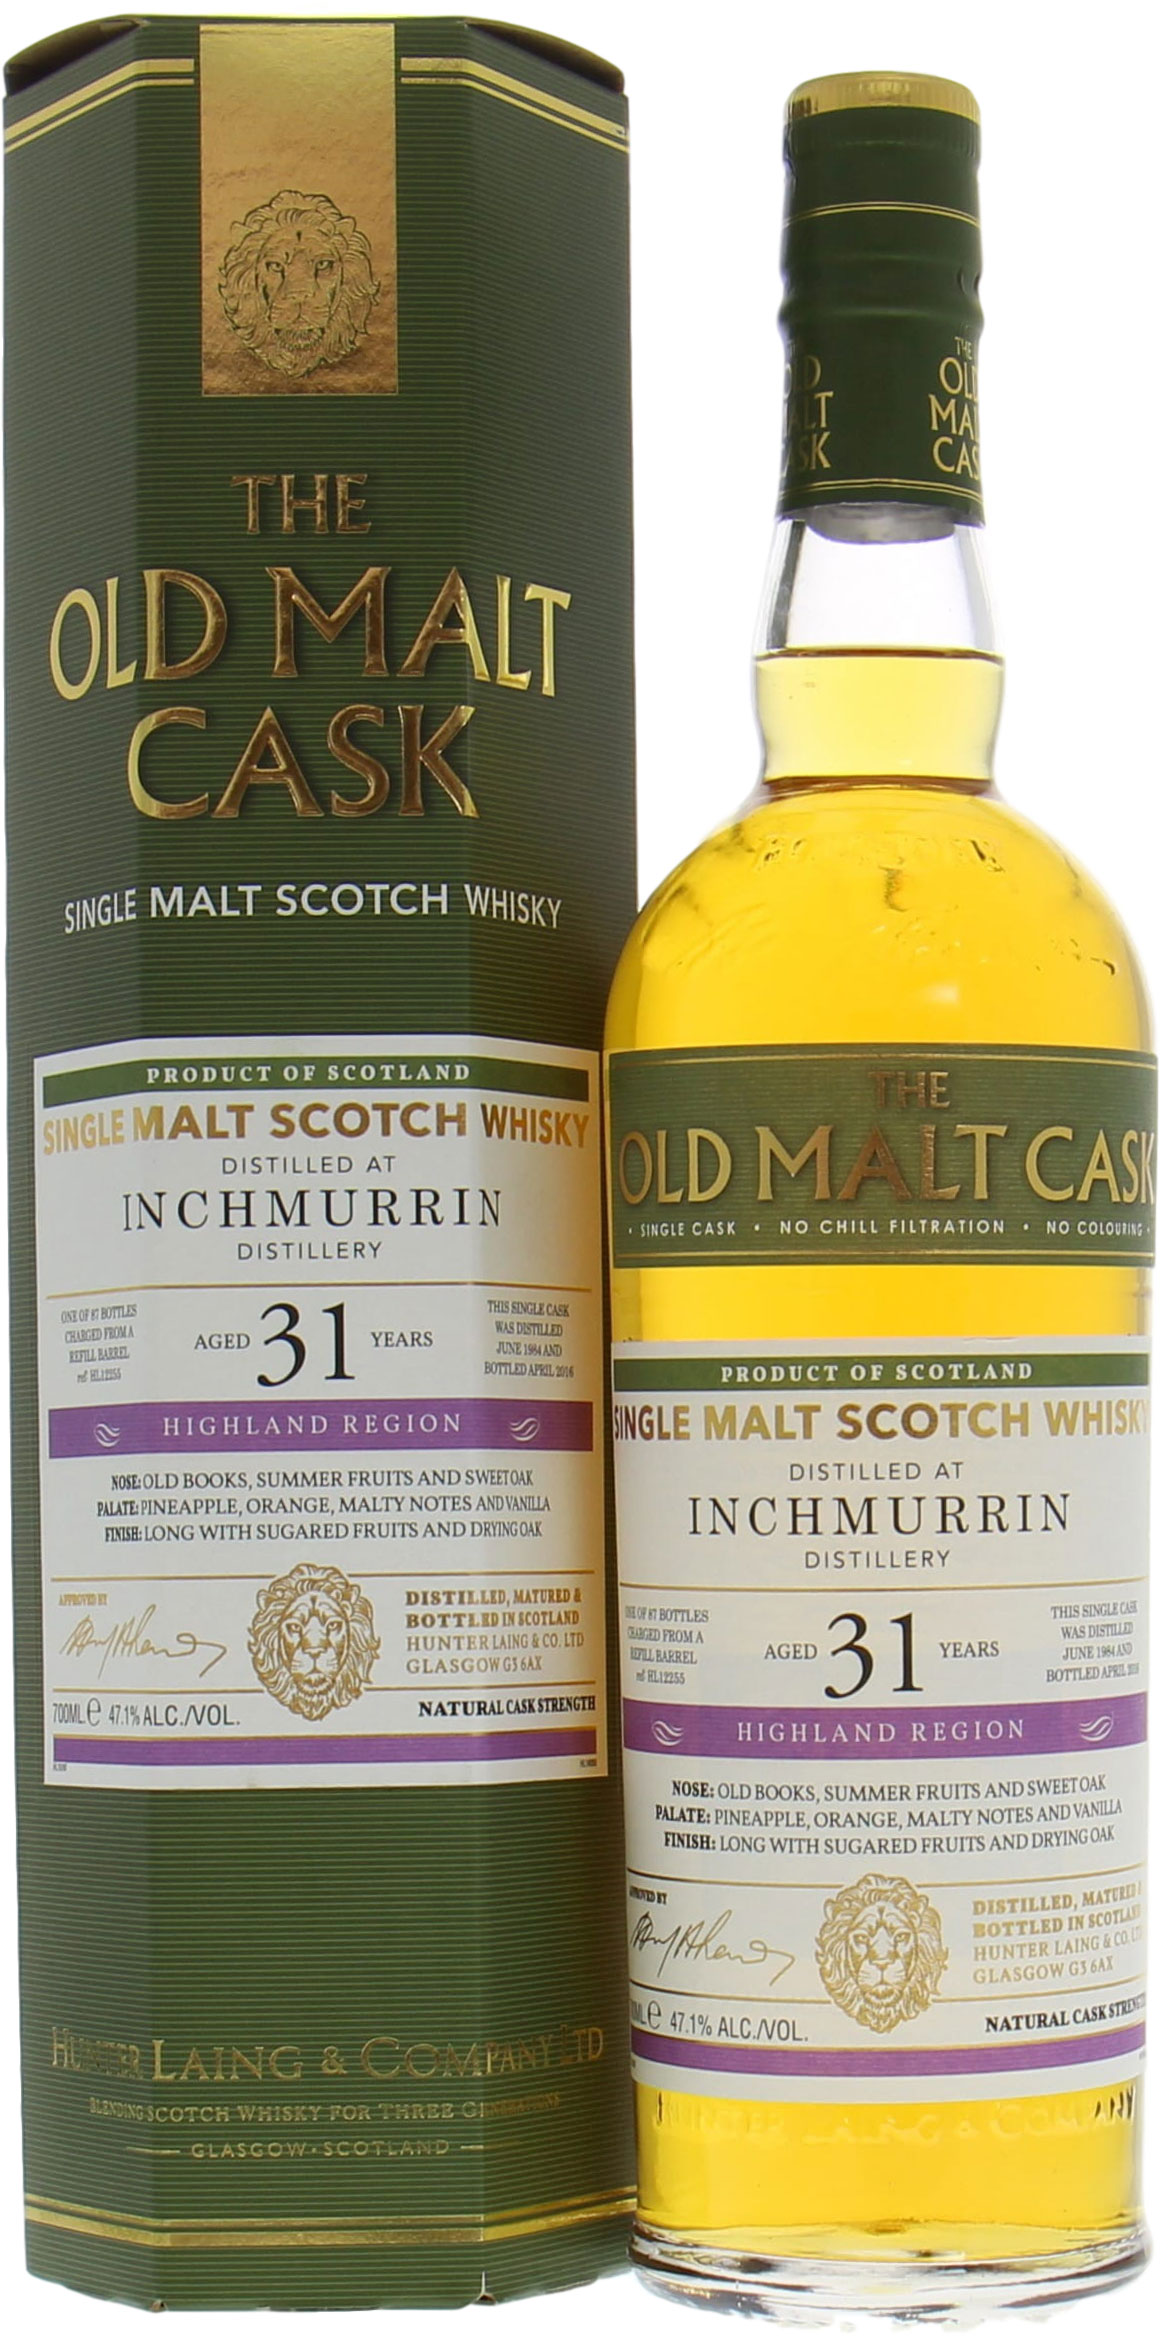 Inchmurrin - 31 Years Old Malt Cask HL12255 47.1% 1994 In Original Container